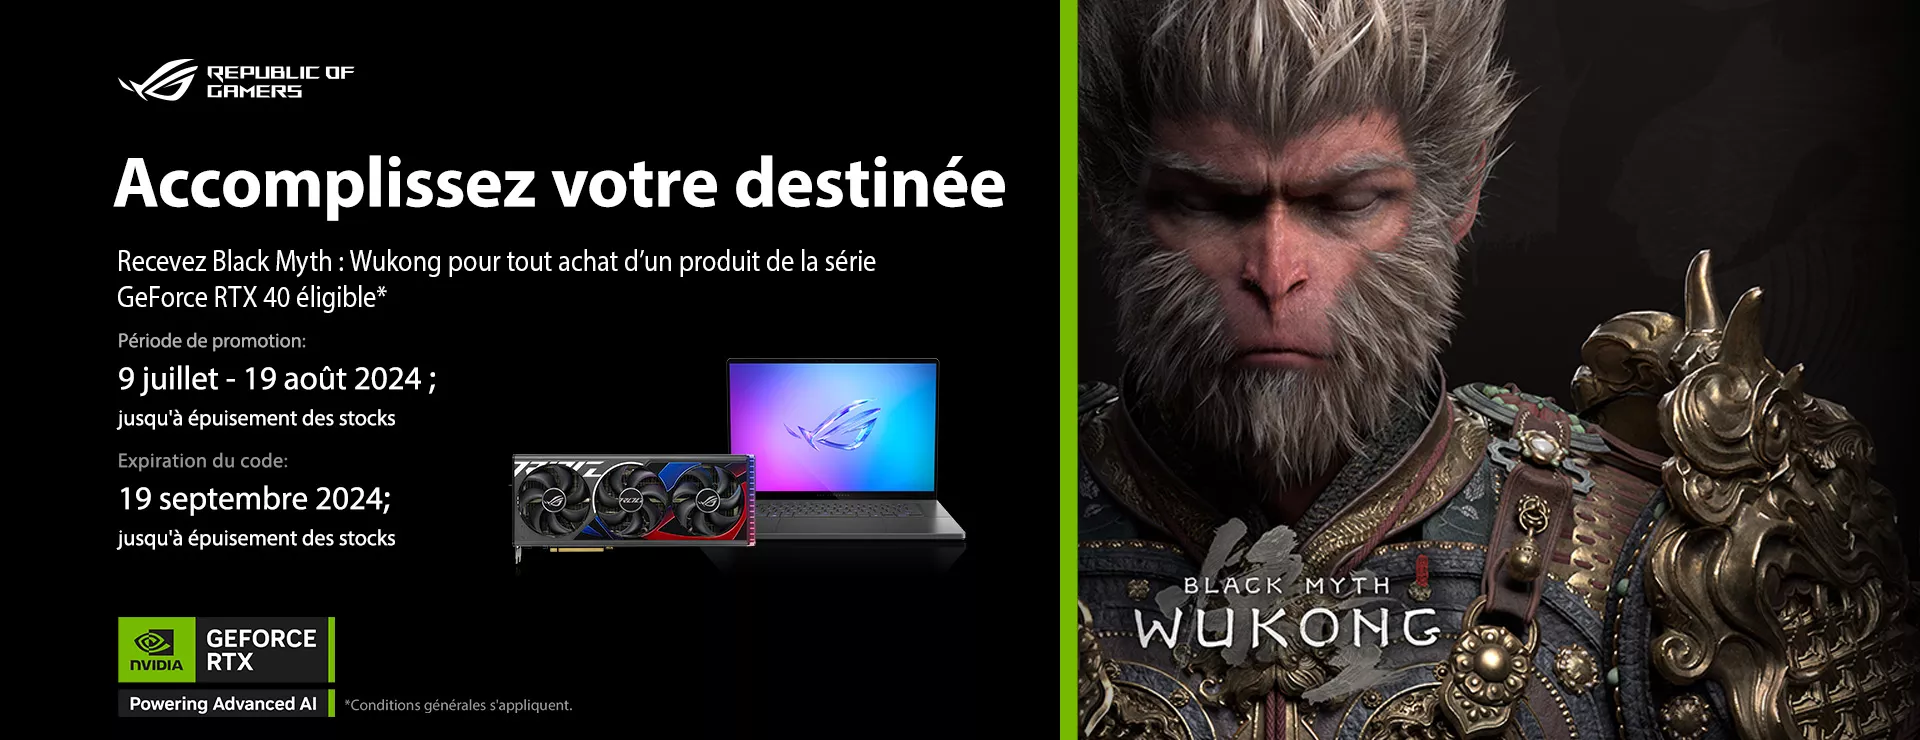 Nvidia GeForce RTX 40 Series with Black Myth: Wukong game offer, featuring gaming laptop and graphics card images, with offer dates from July to September 2024.